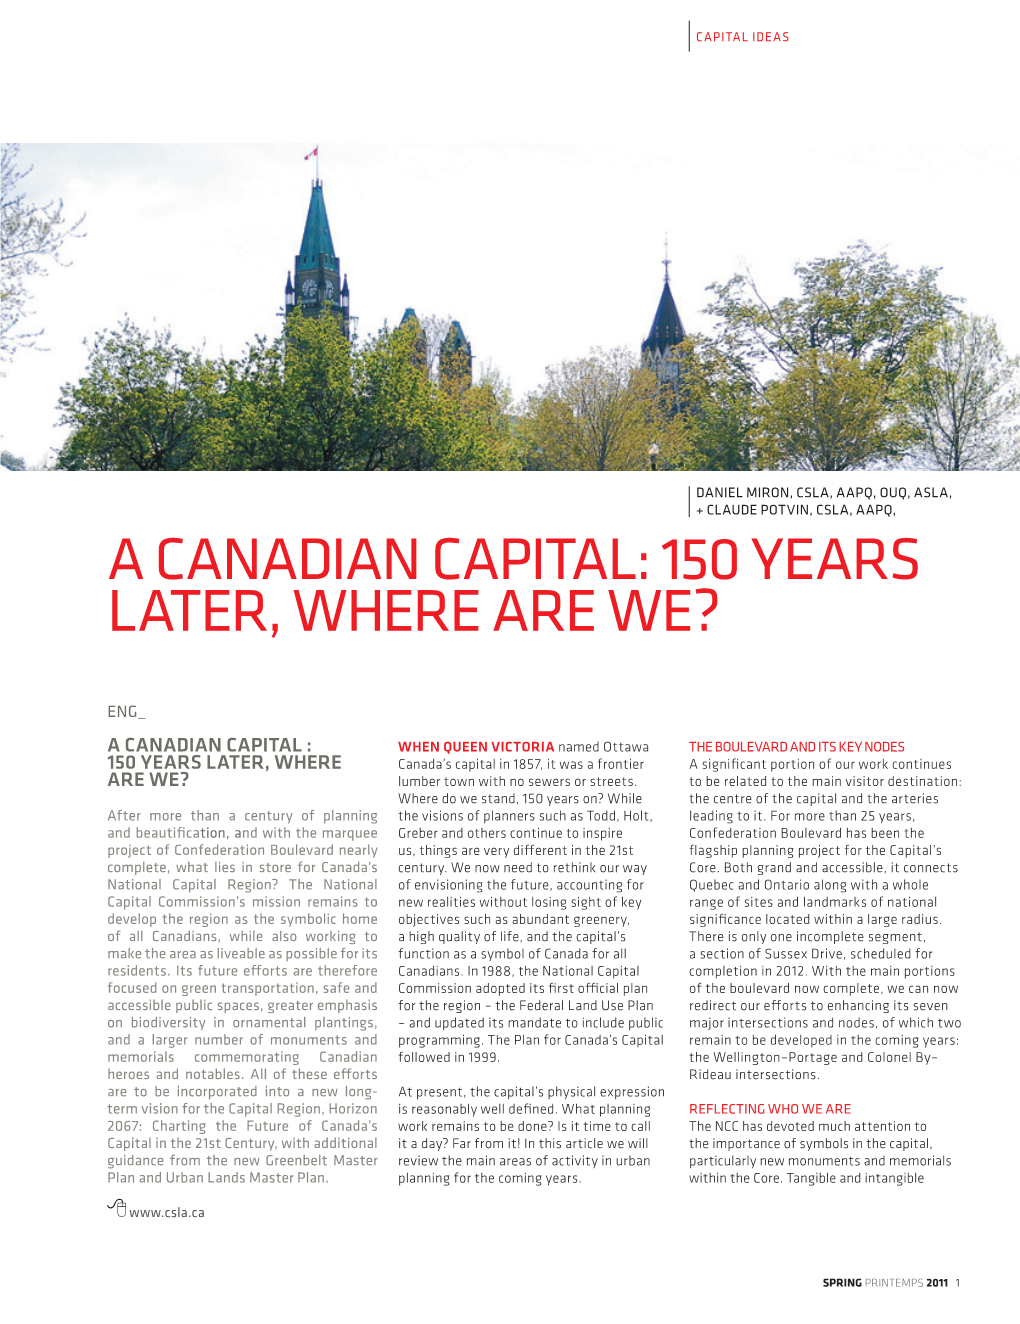 A Canadian Capital: 150 Years Later, Where Are We?